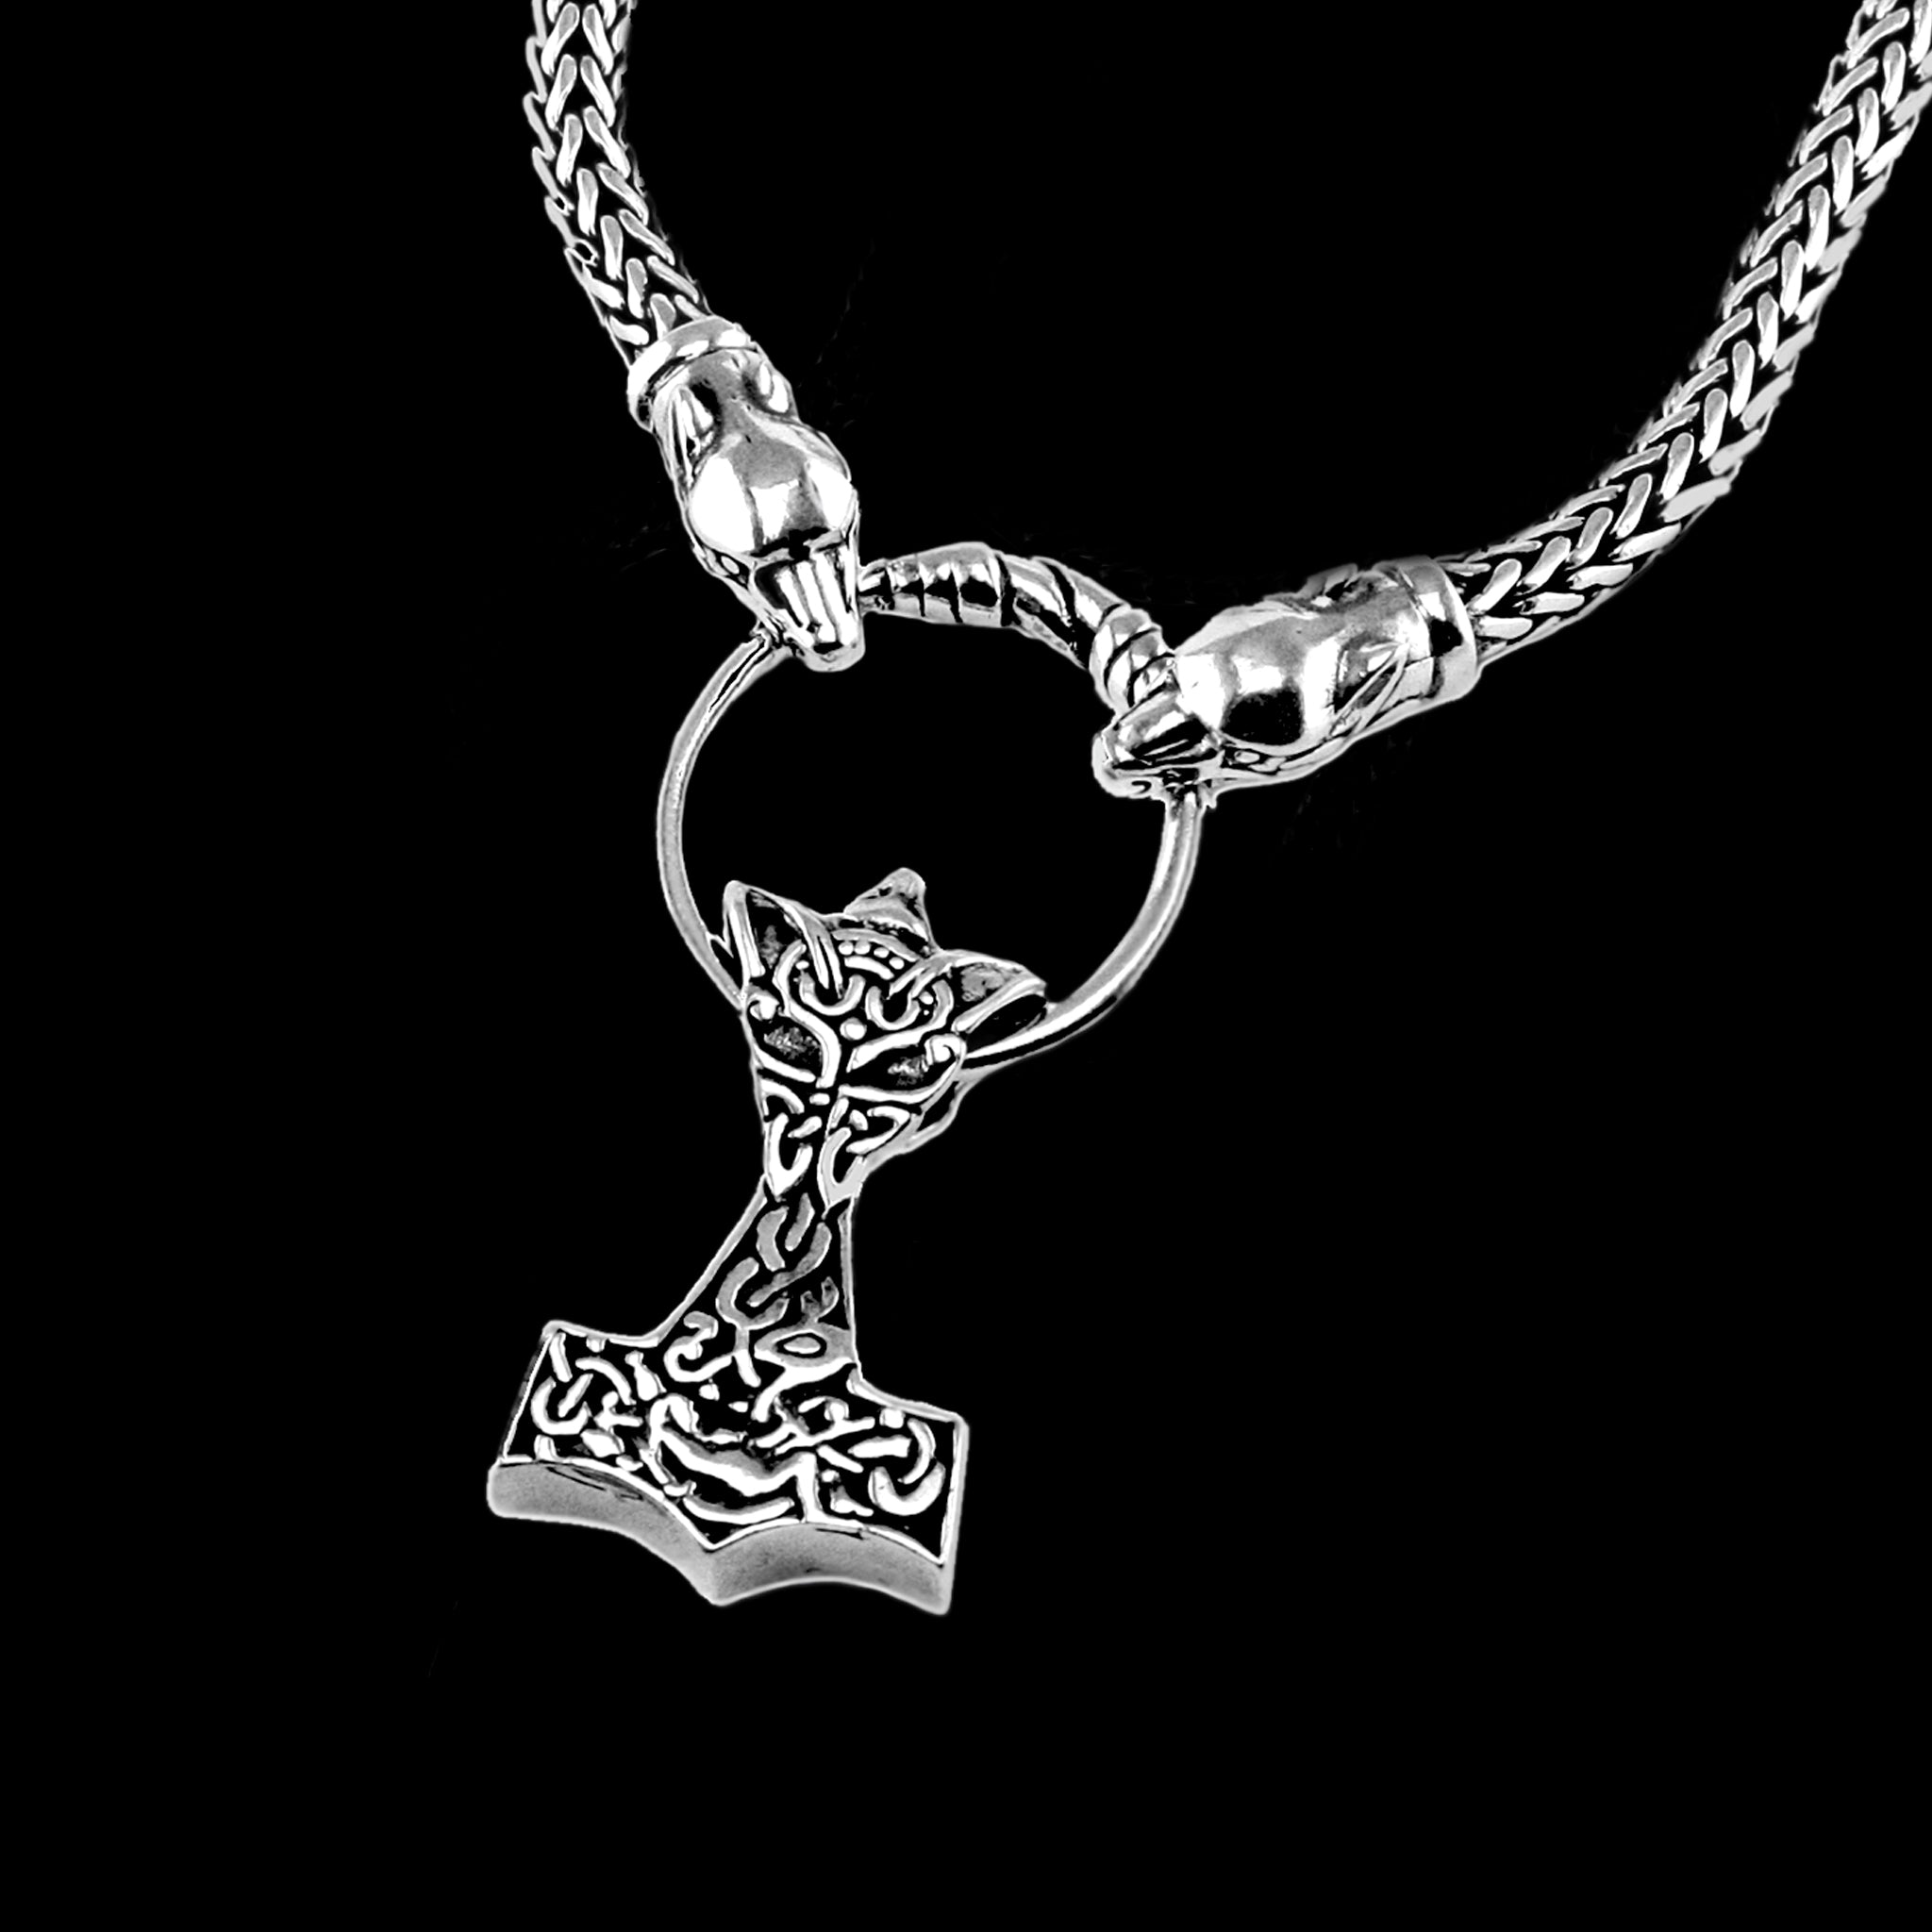 Silver Wolf Thors Hammer Viking Pendant by Kai Uwe Faust with Split Ring and Silver Snake Chain Necklace with Ferocious Wolf Heads